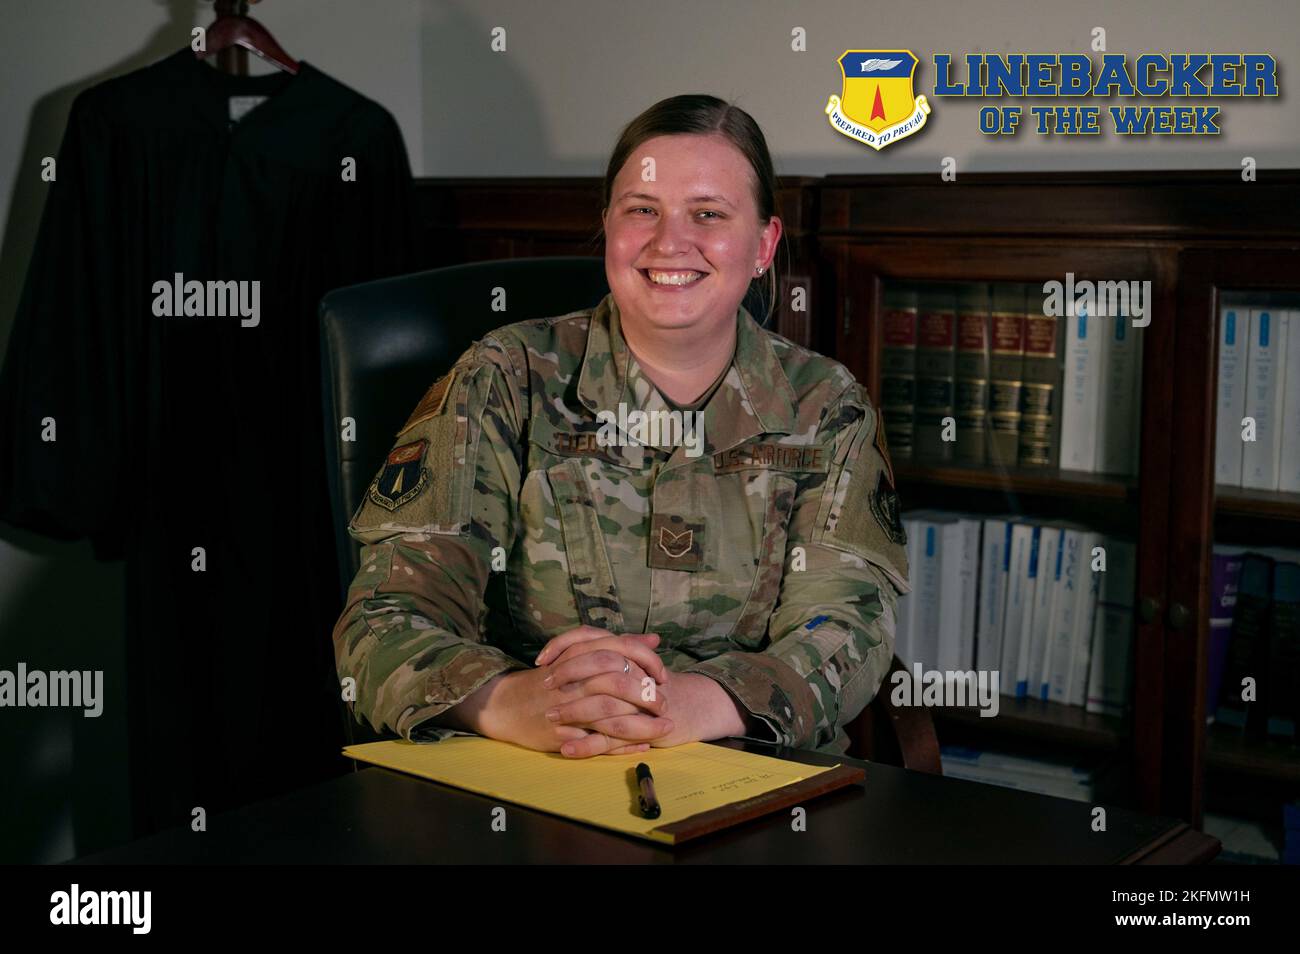 U.S. Air Force Staff Sgt. Emily Tiedt, the noncommissioned officer in charge of adverse actions, assigned to the 36th Wing office of the Staff Judge Advocate, sits in the judge’s chambers of the courtroom at Andersen Air Force Base, Guam, Sept. 21, 2022. Tiedt hard work since arriving at Andersen AFB in 2021 led her to be recognized as the 11th Air Force Paralegal of the Quarter as well as the Pacific Air Forces Paralegal of the Month. Stock Photo